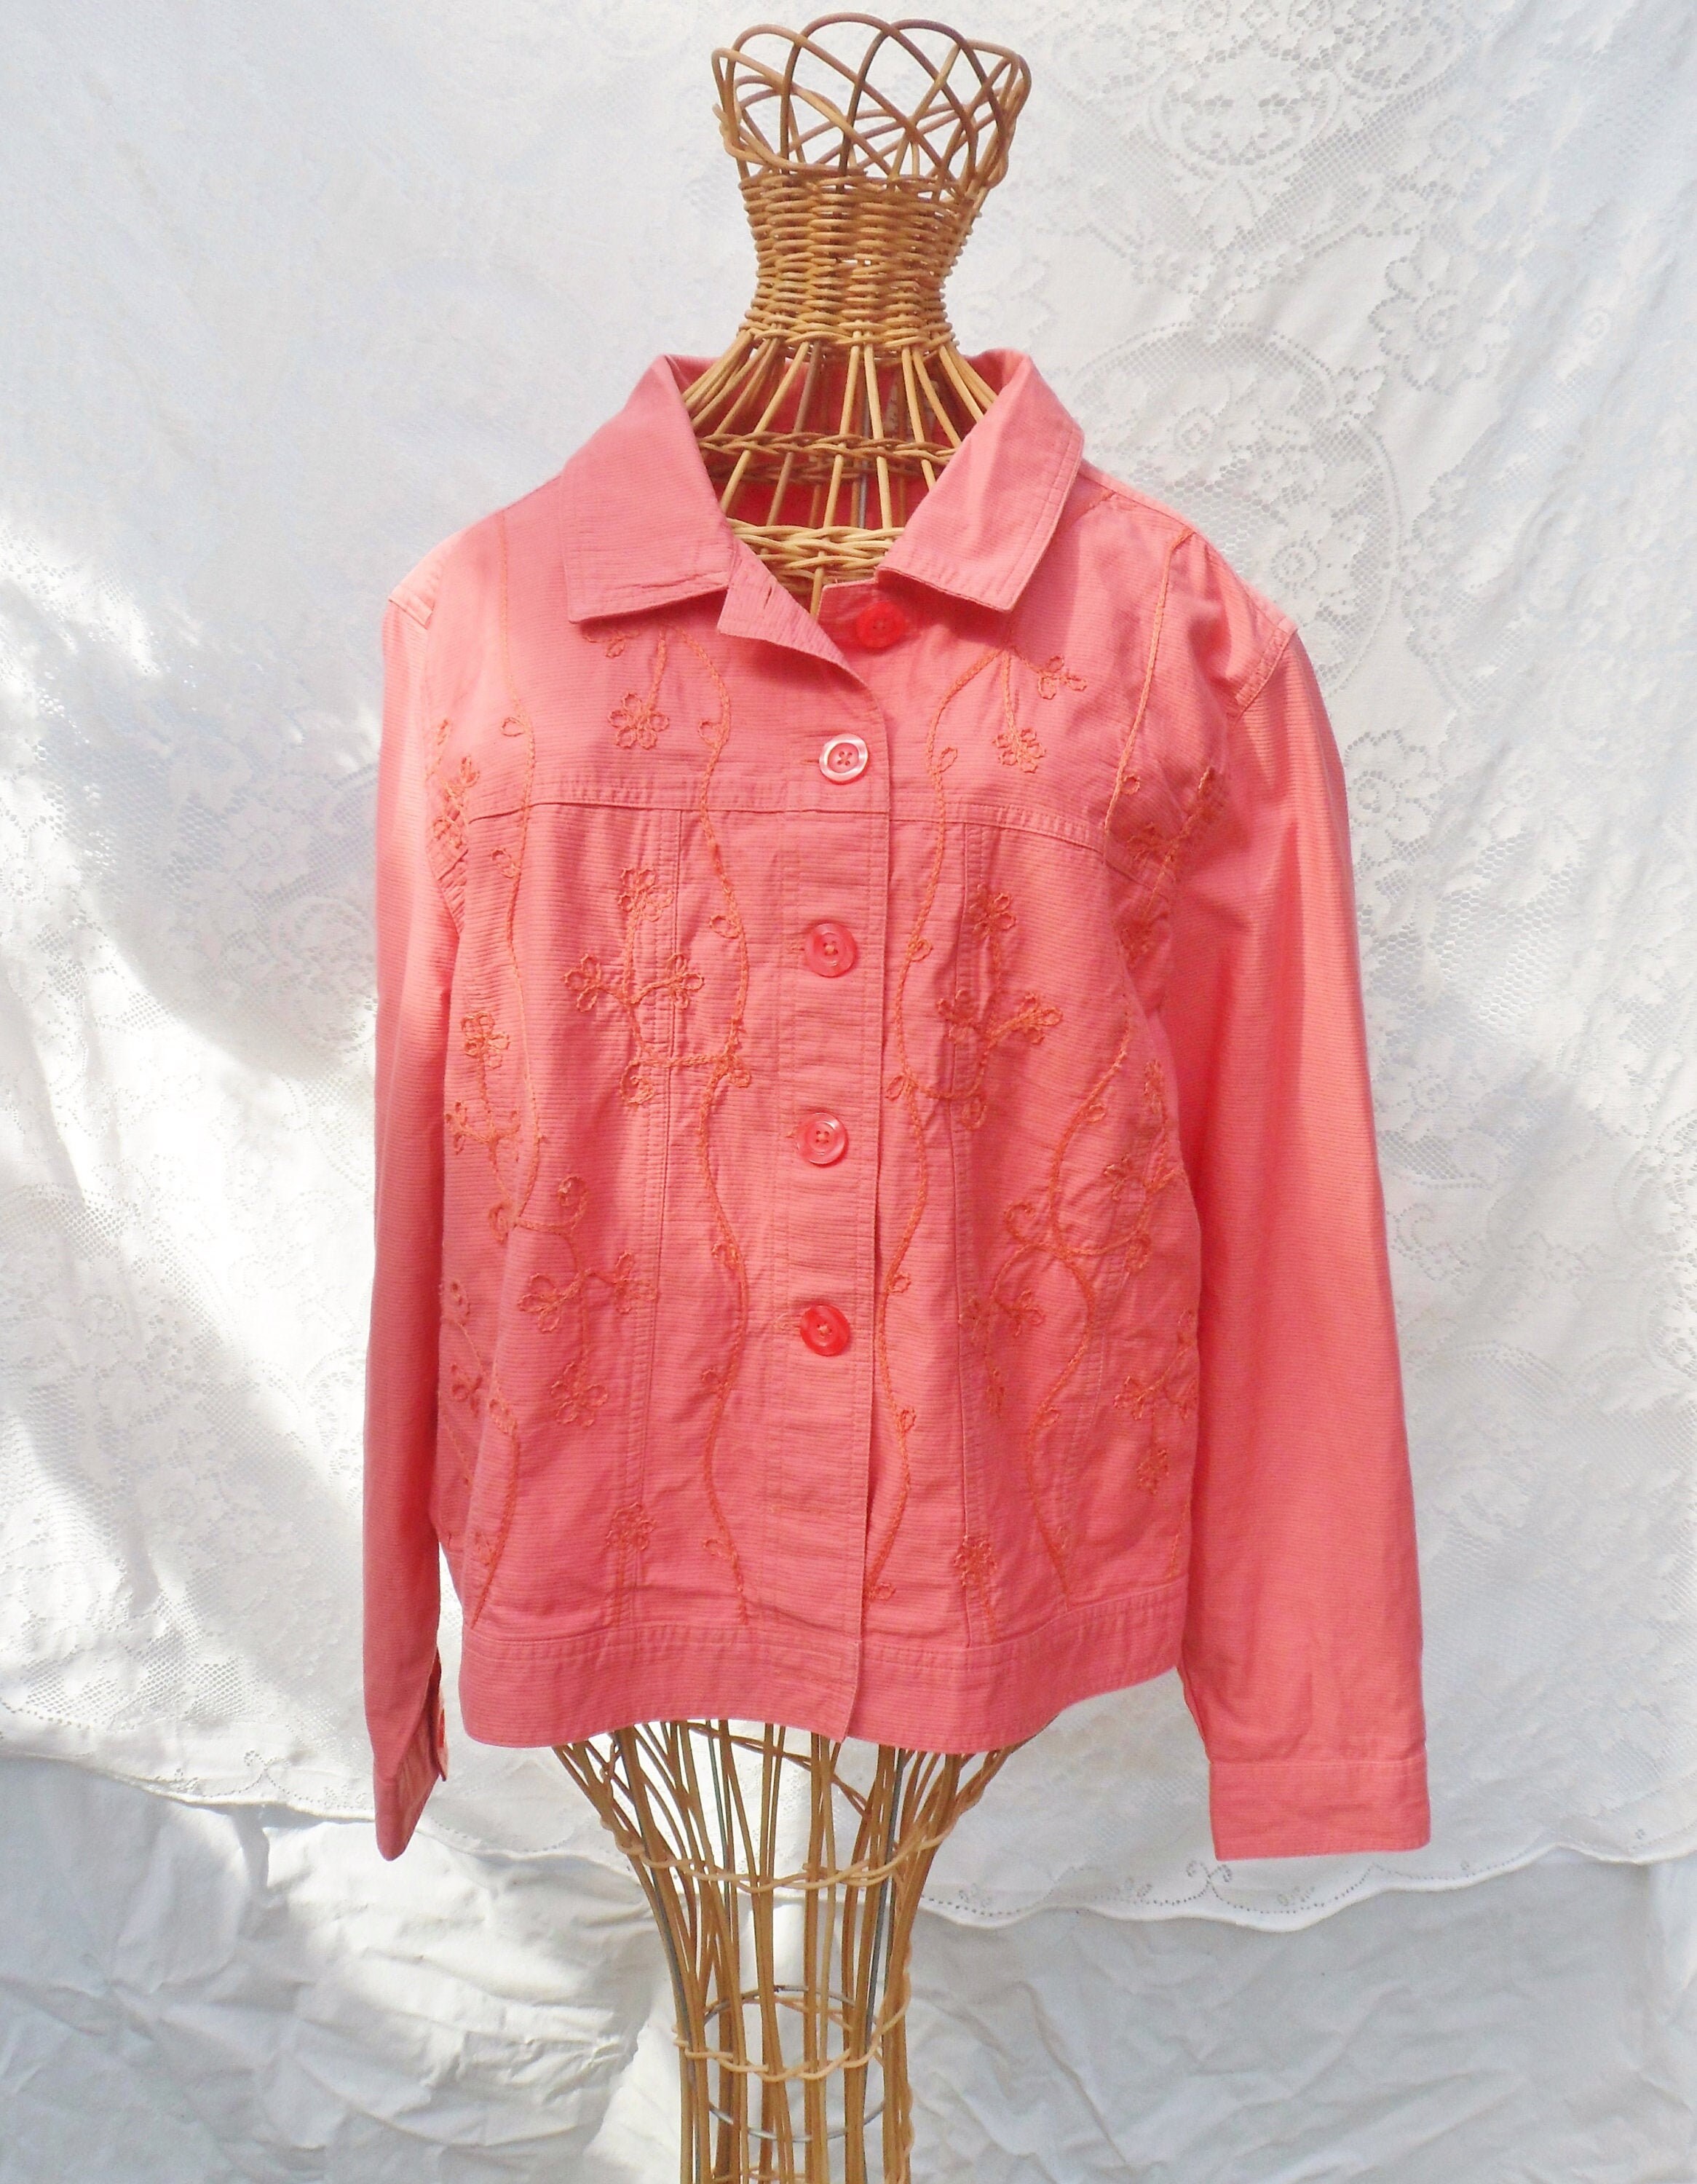 Linden Hill Jacket Embroidered Coral Button Front Jacket - Etsy